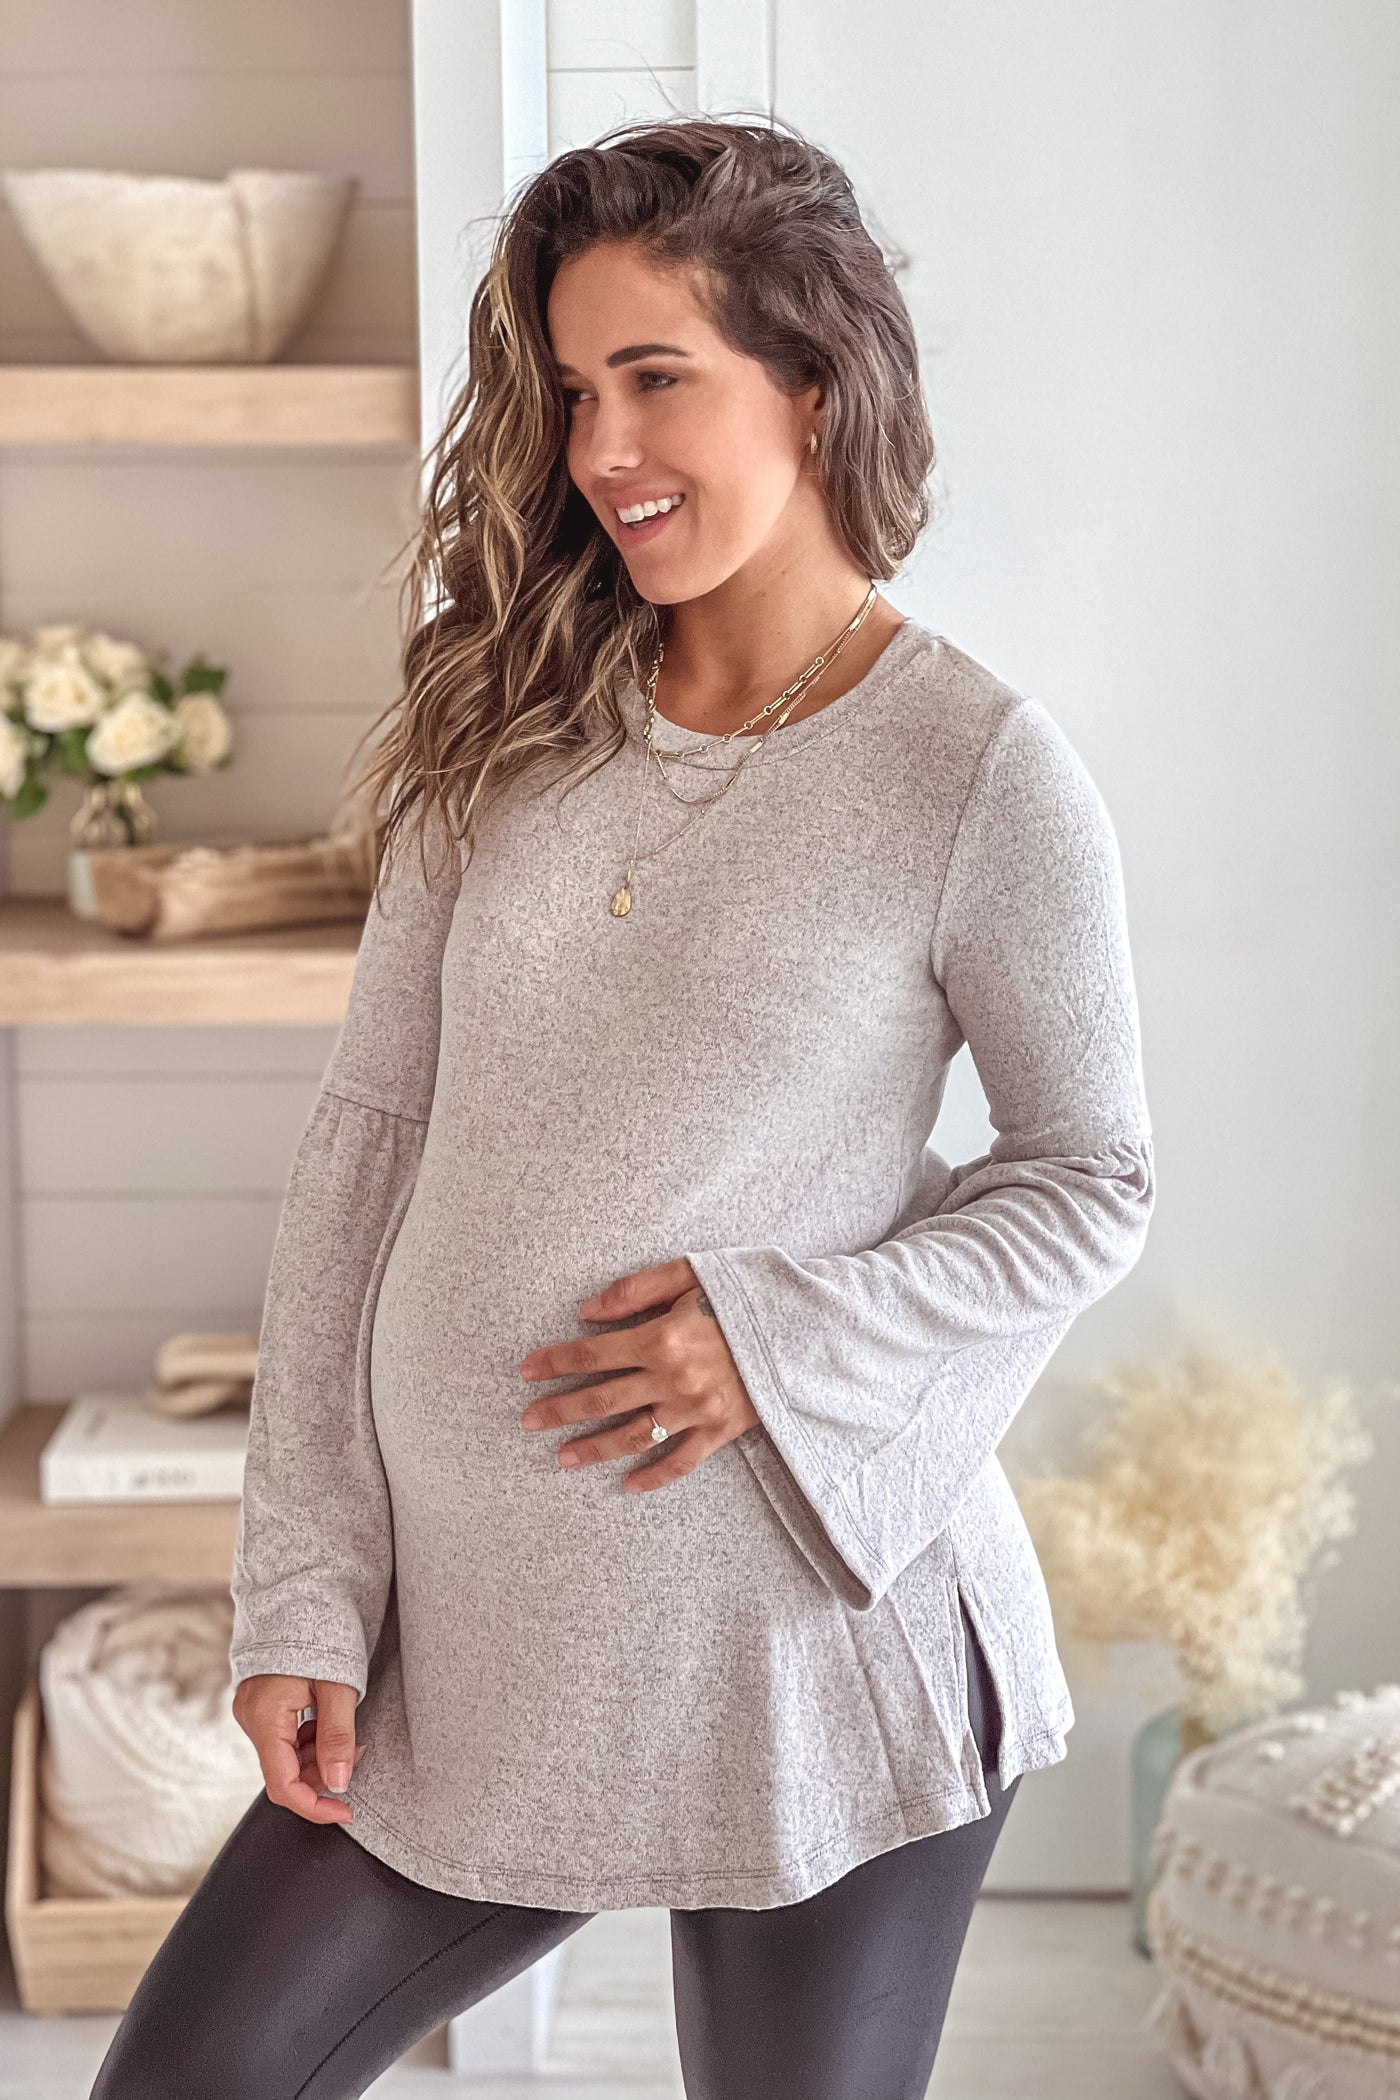 heather gray maternity top with slits